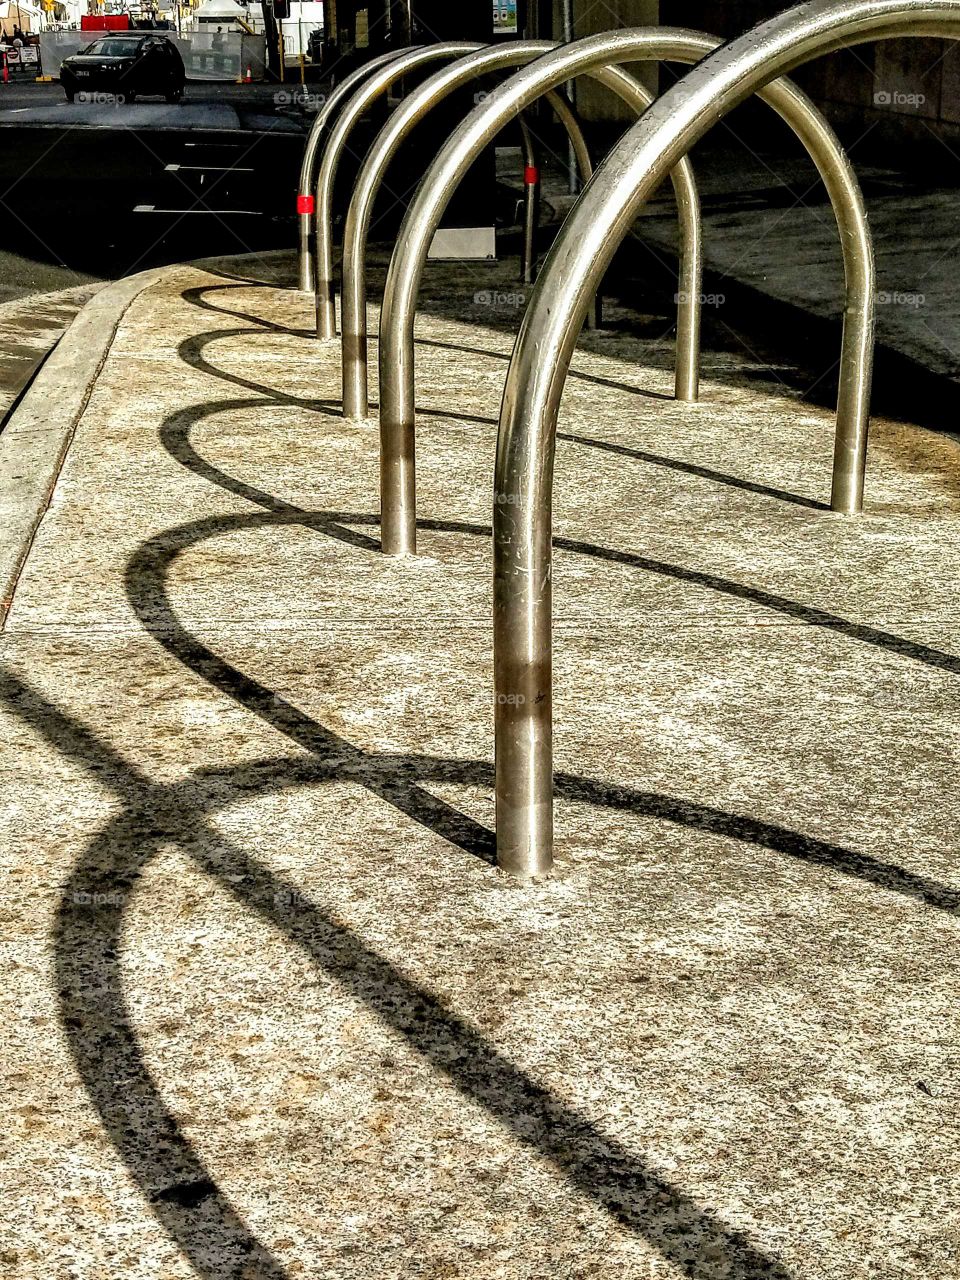 shadow pattern / Bycycle rack !